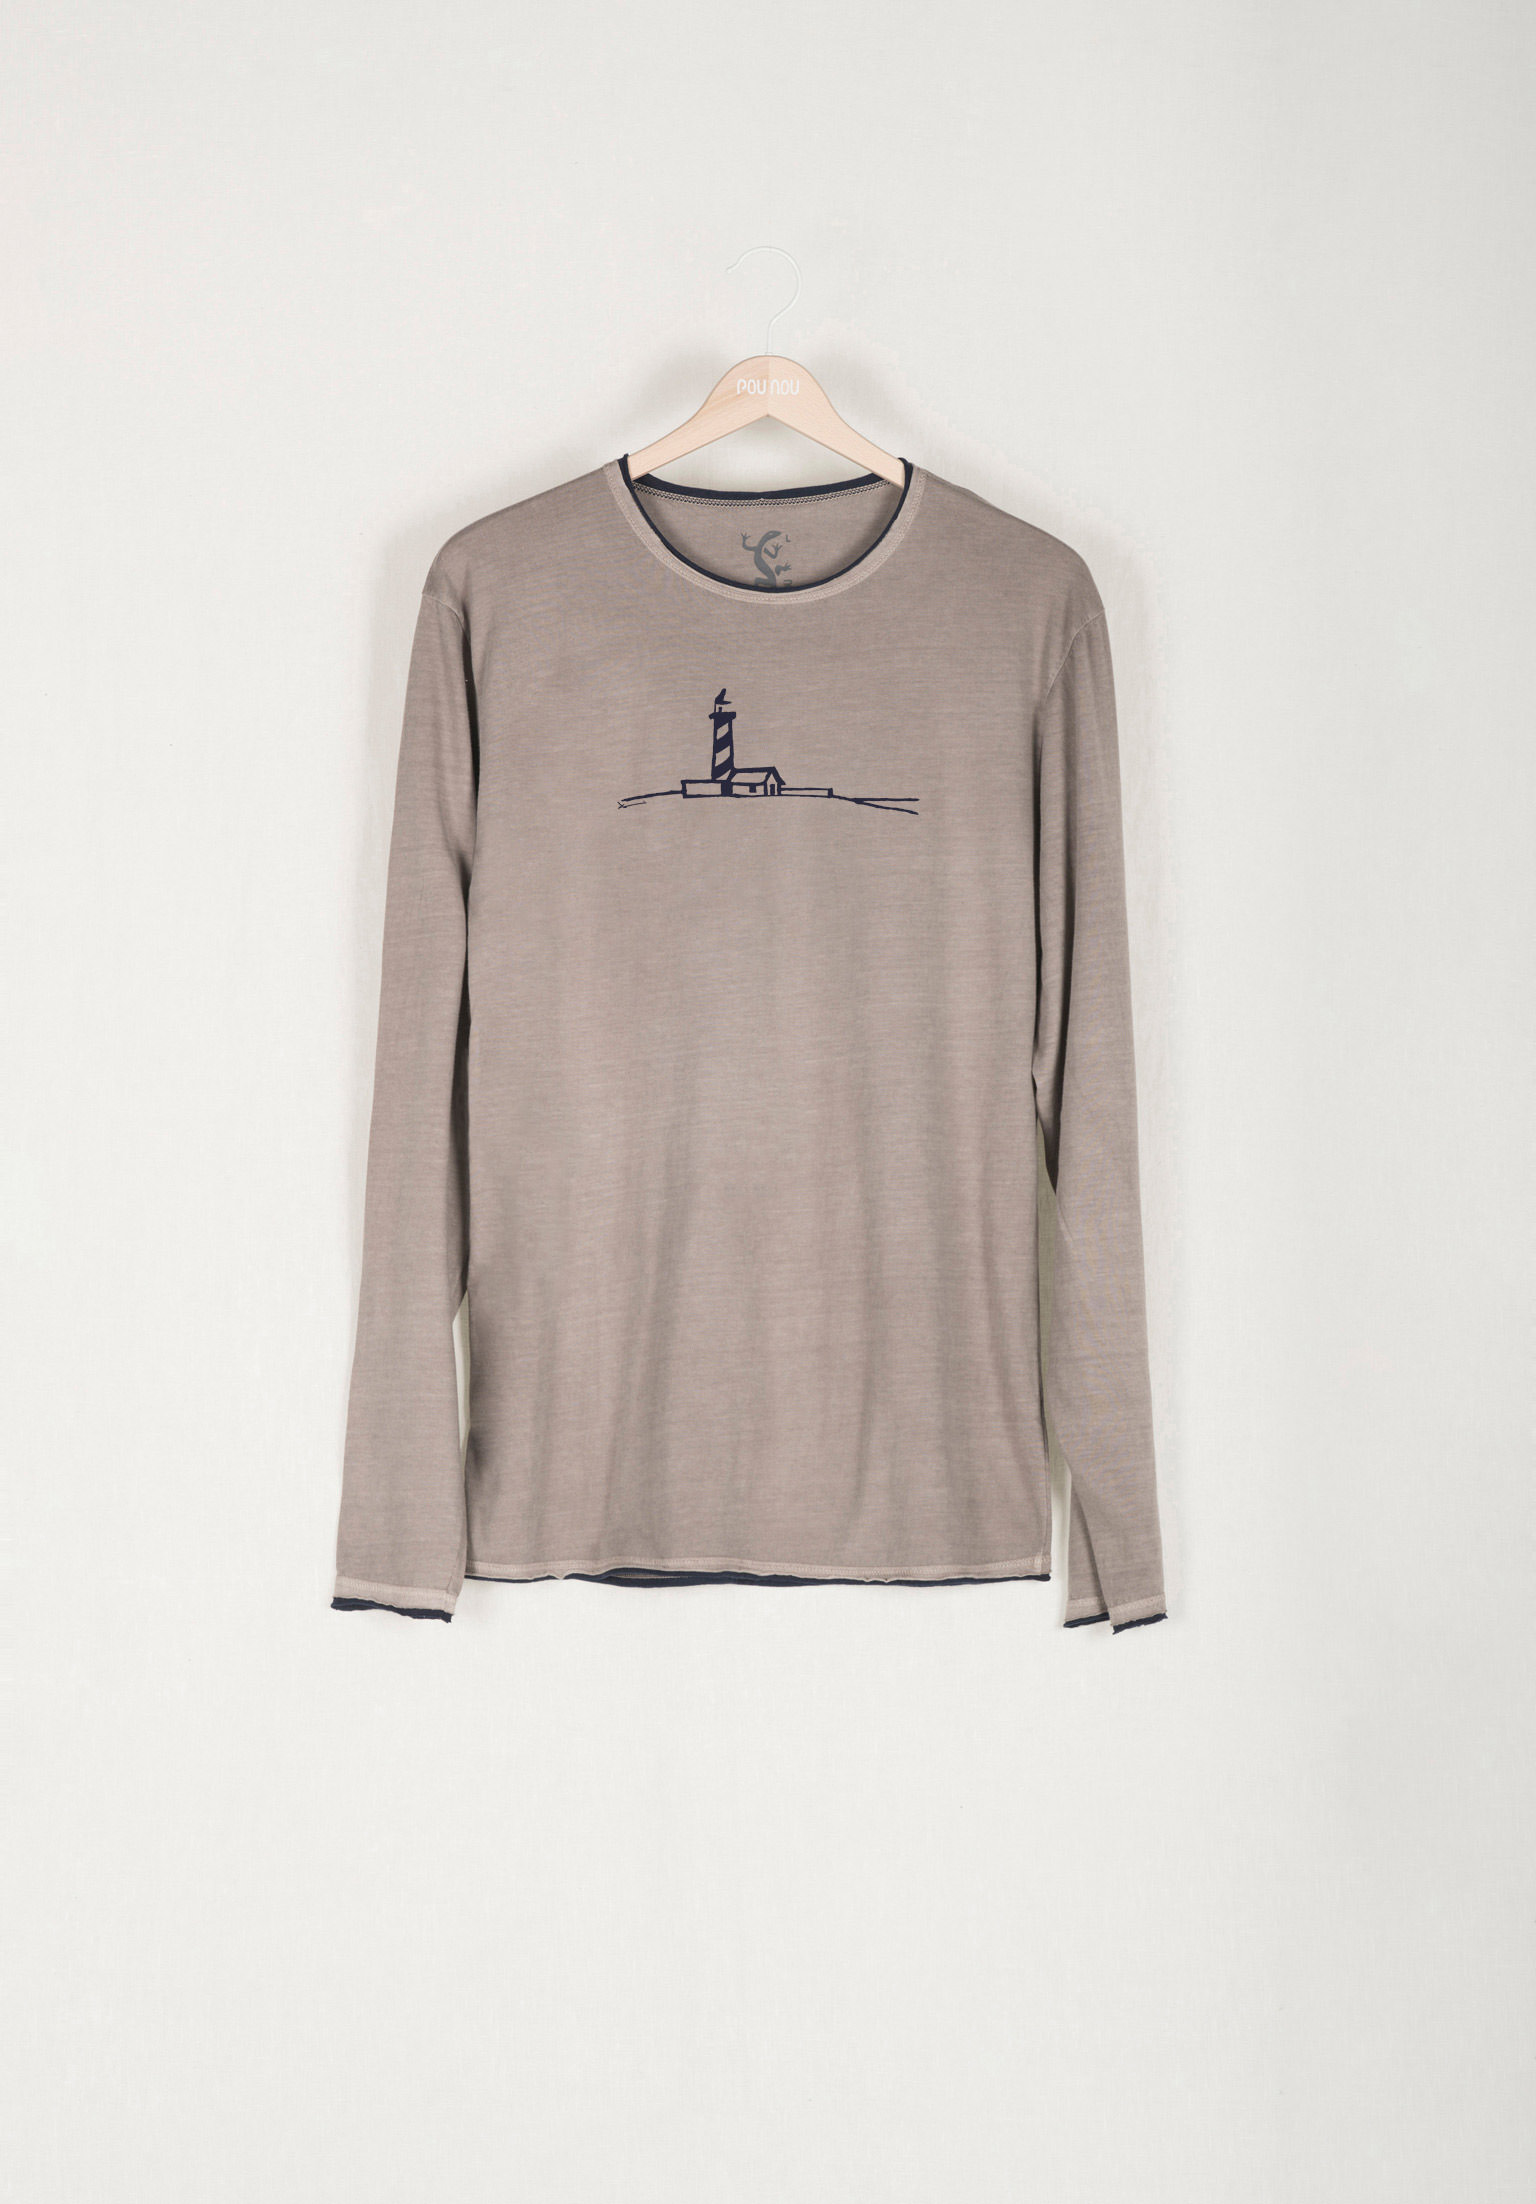 Long-sleeved cotton t-shirt rollie lighthouse view